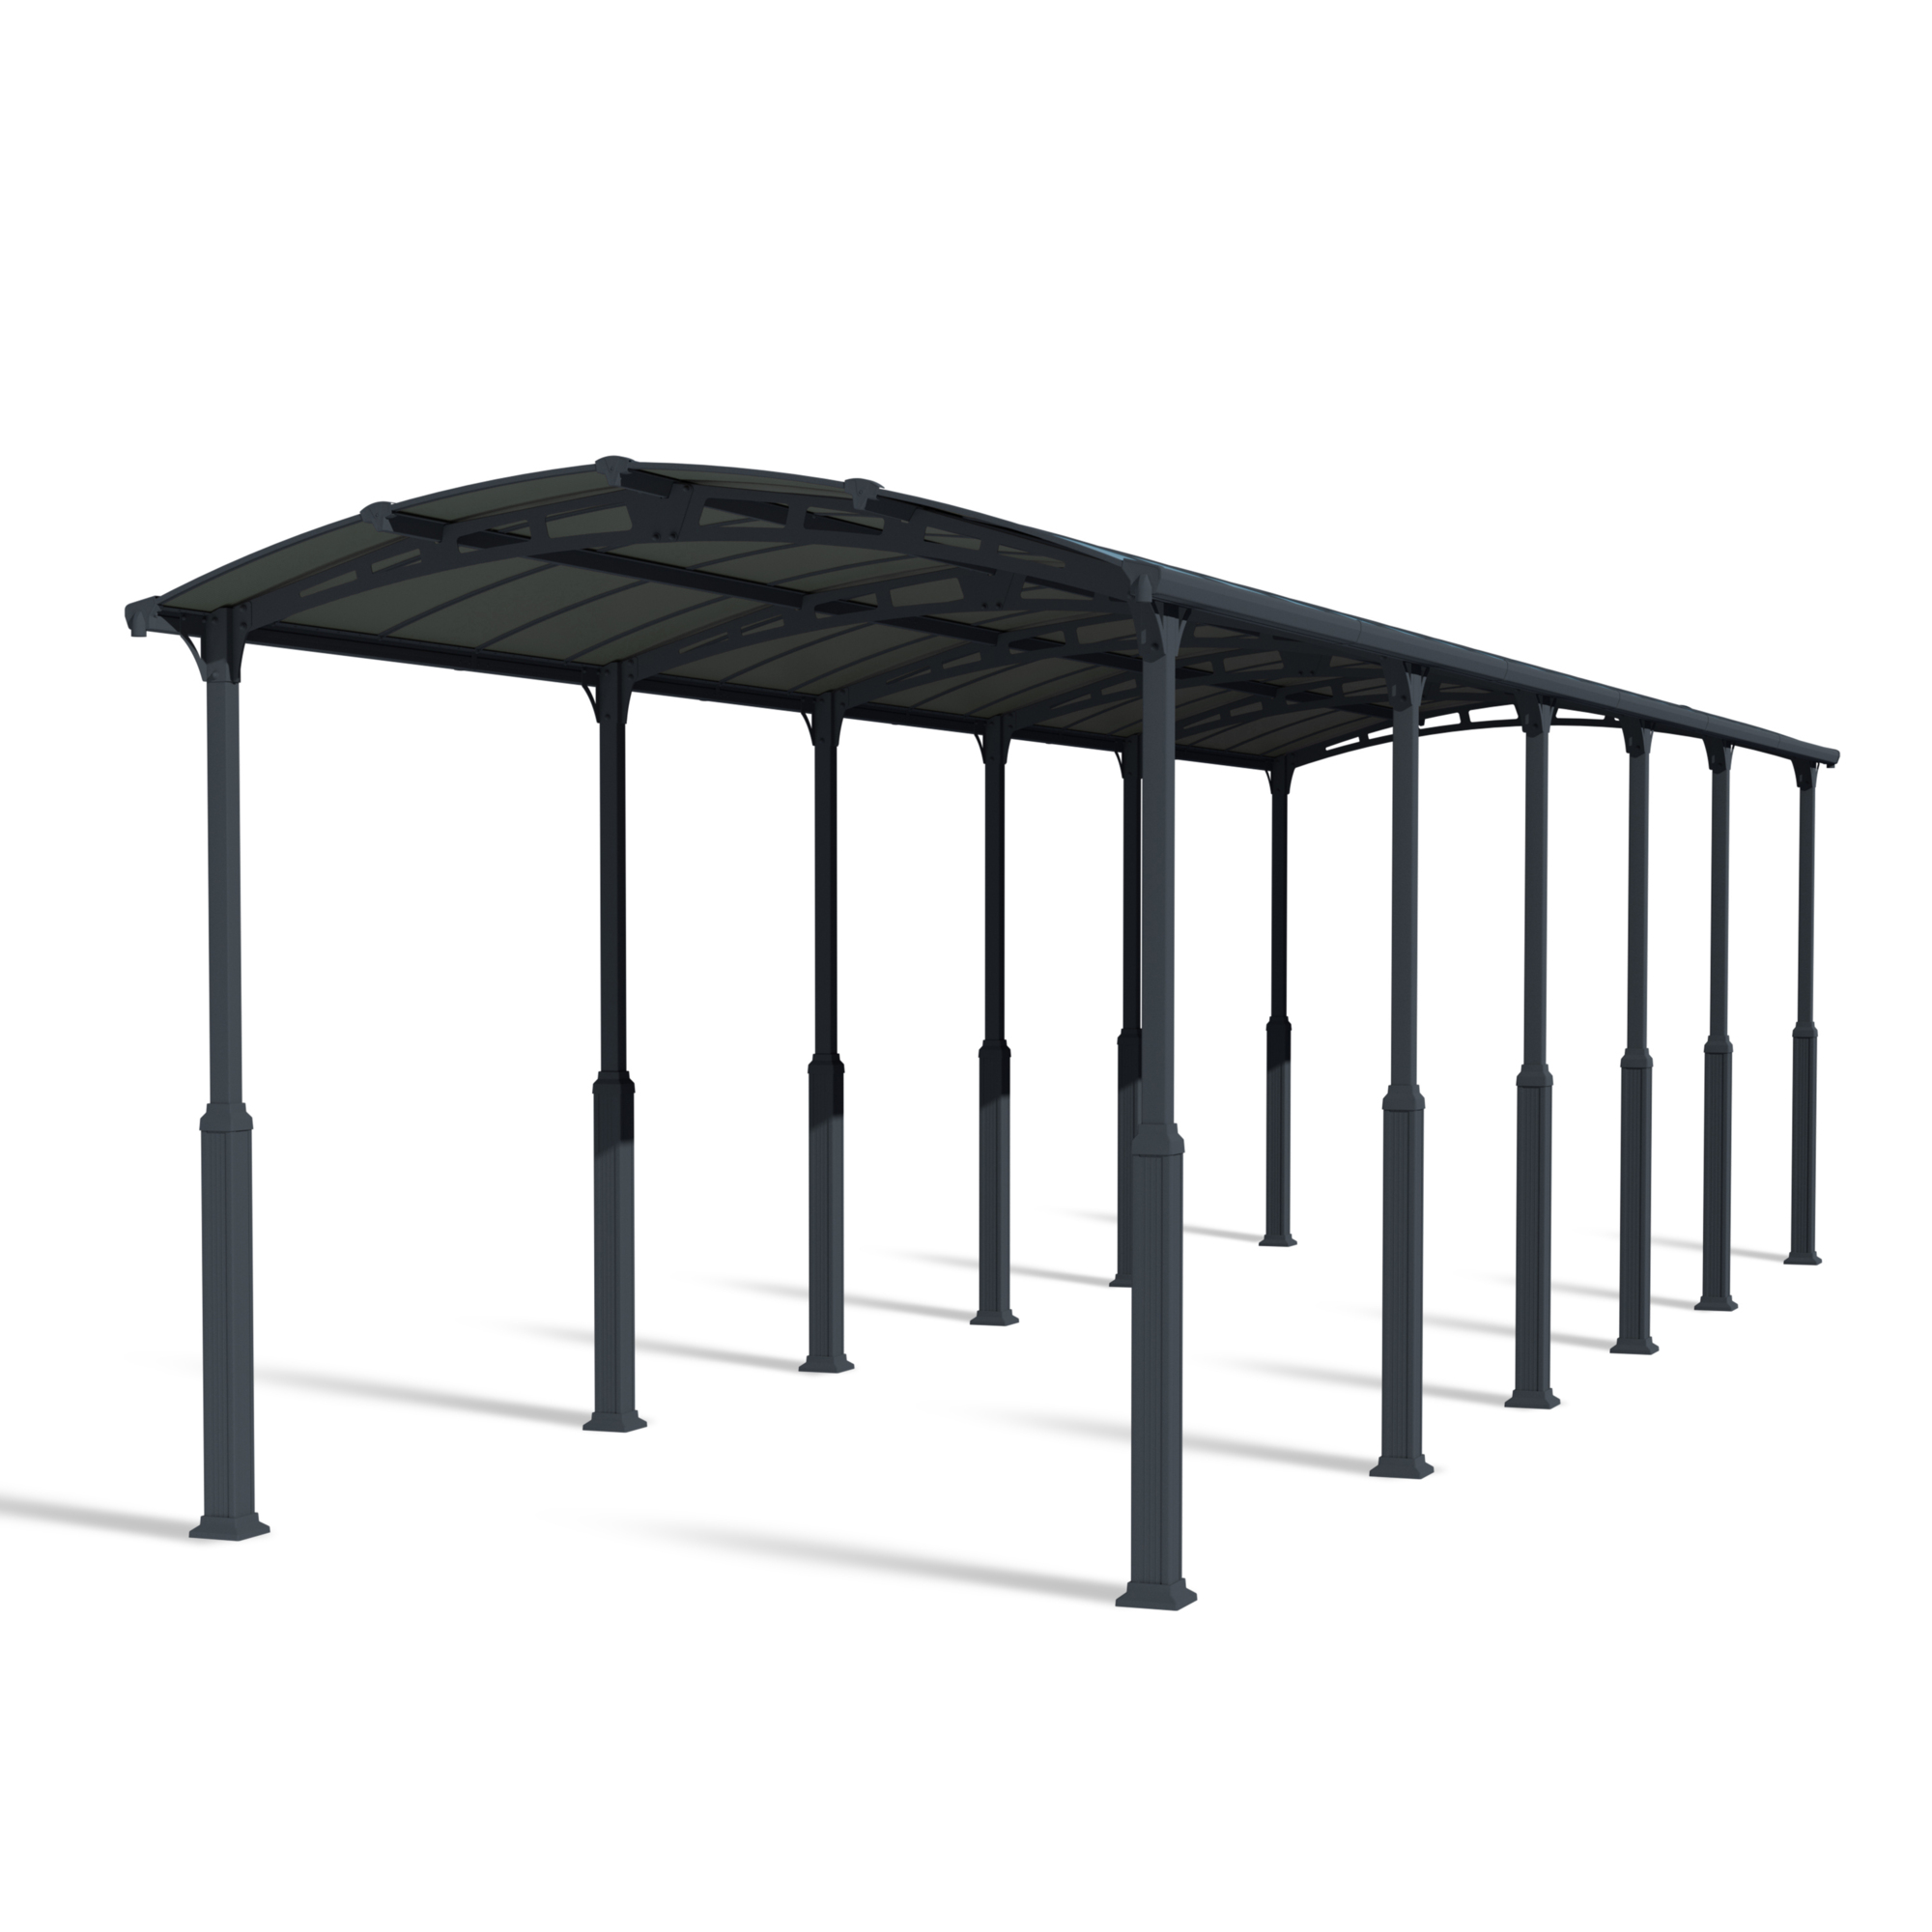 Poly-Tex Inc., Palram - Canopia Arcadia Alpine 12ft. x 42ft. Carport, Width 235 in, Height 118 in, Cover Material Polycarbonate, Model 705917